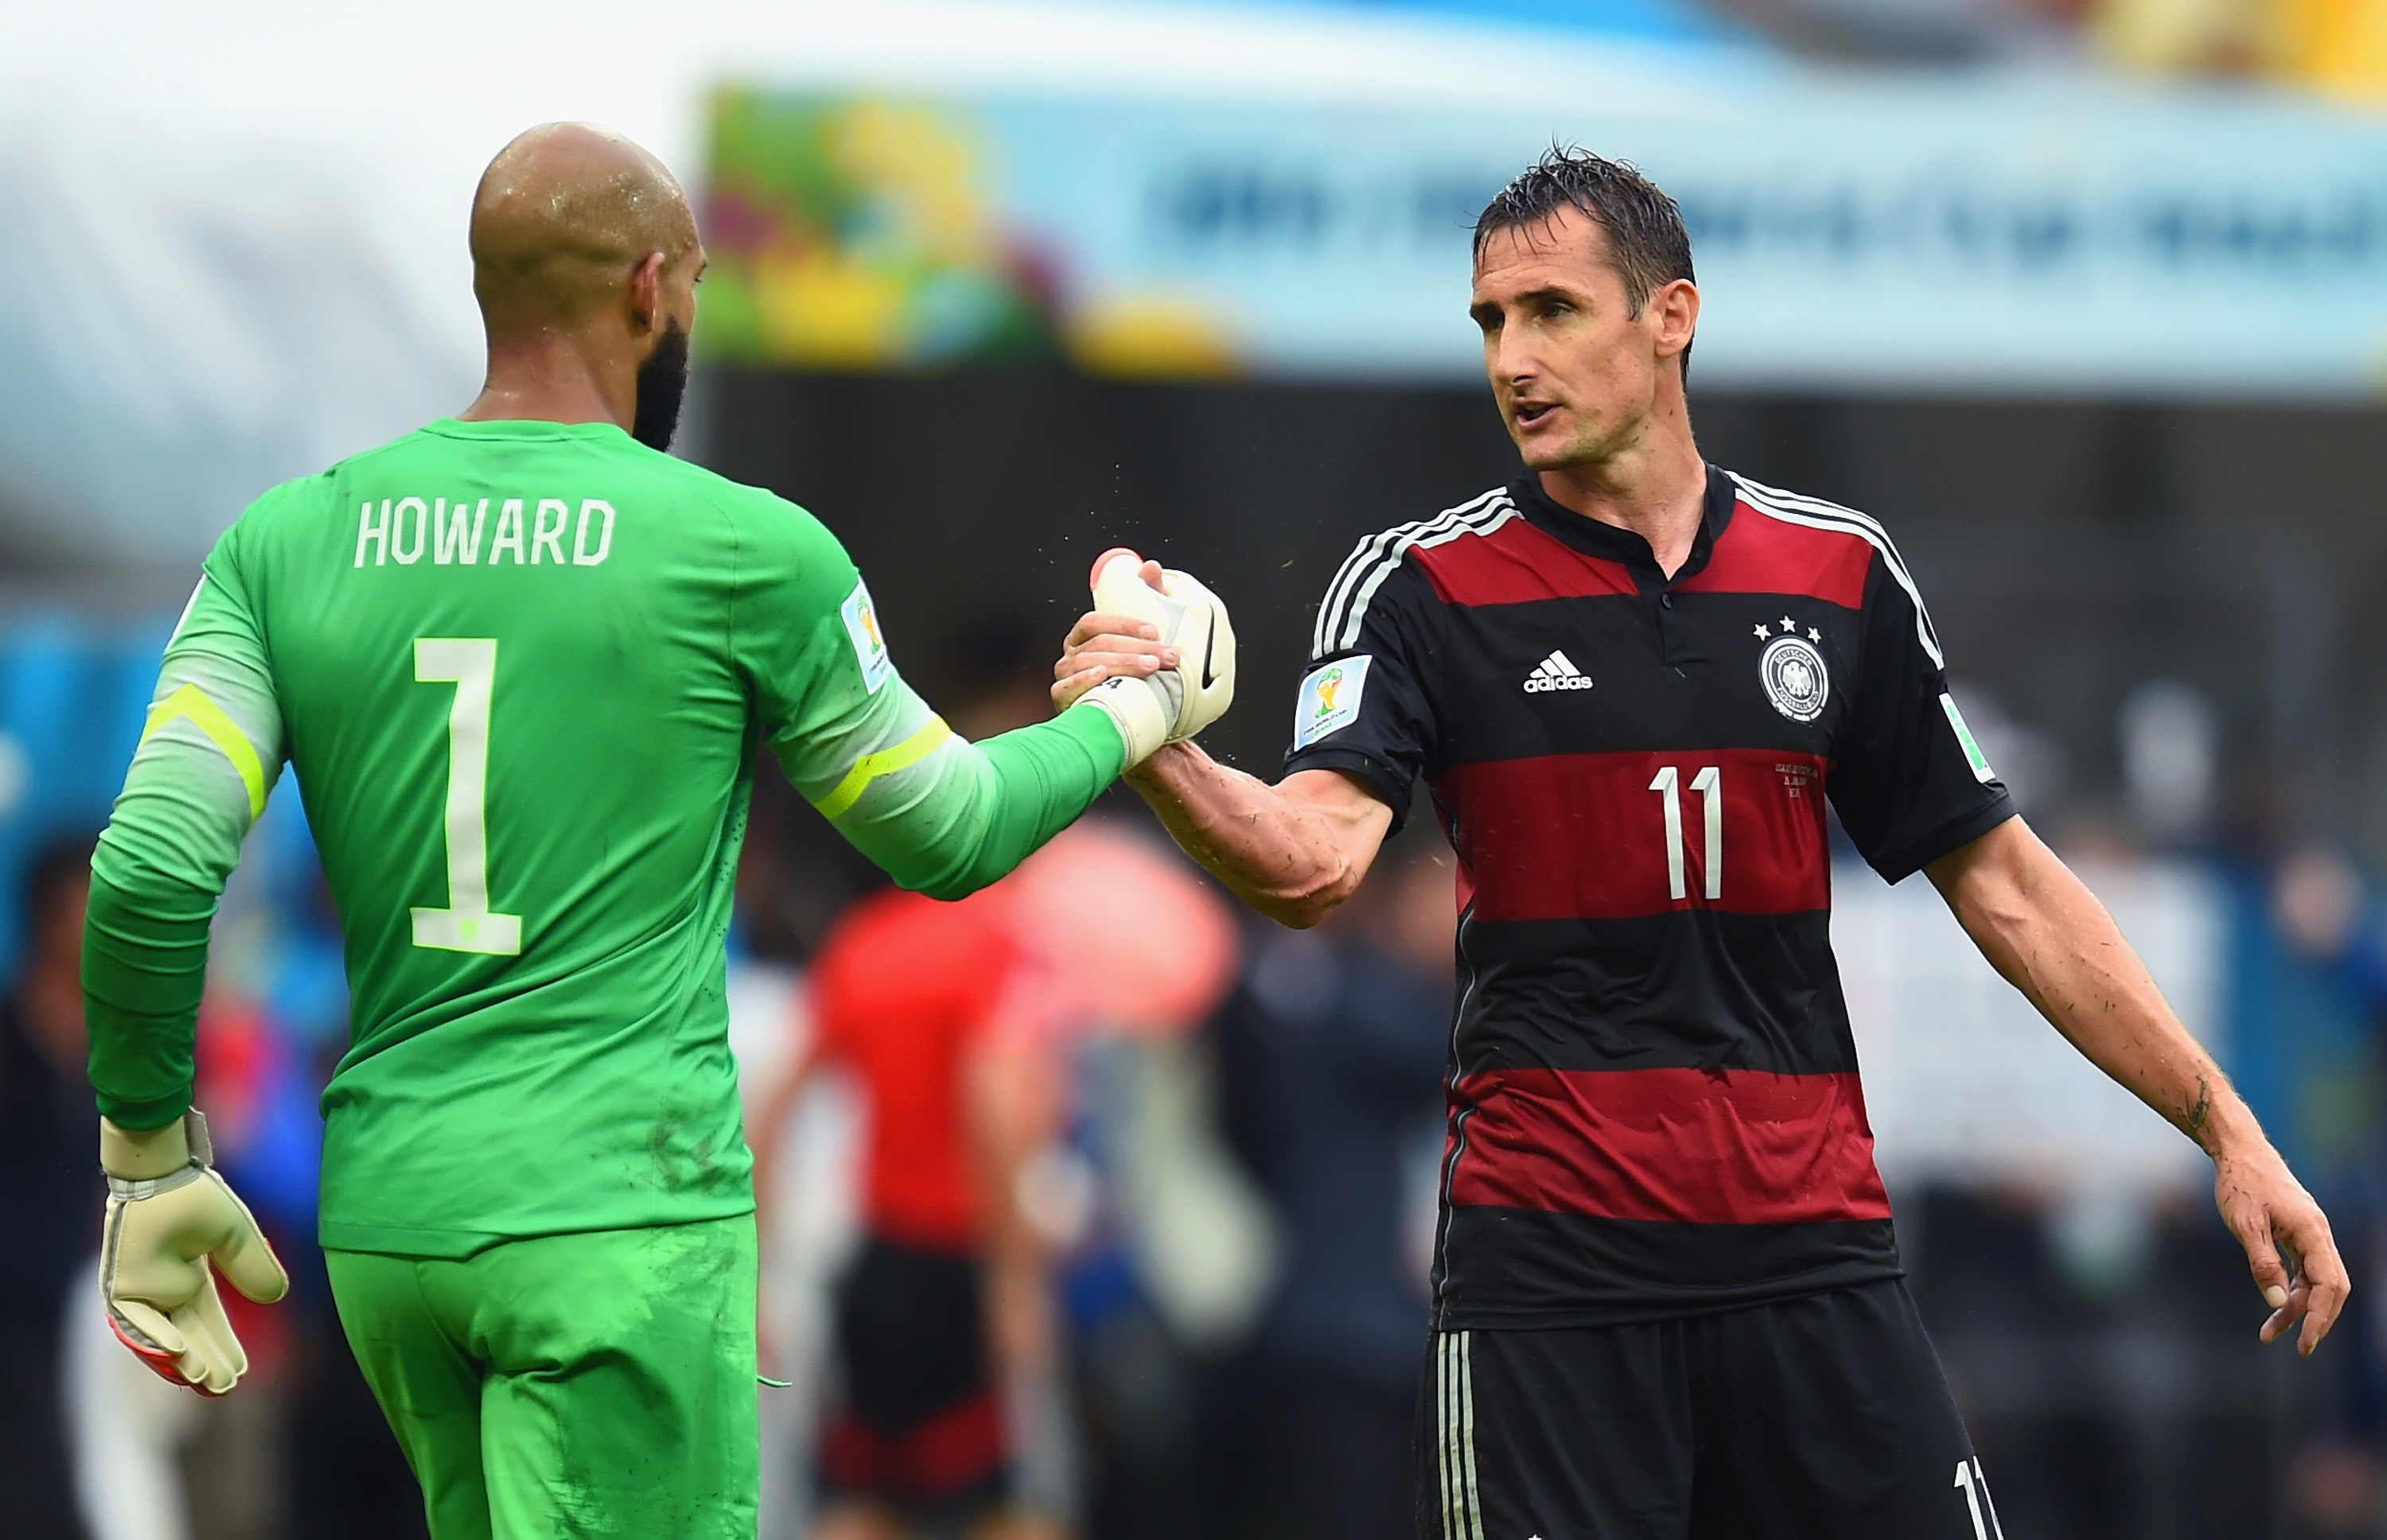 Tim Howard of the United States and Miroslav Klose of Germany shake hands after Germany's 1-0 win during the 2014 FIFA World Cup Brazil group G match between the United States and Germany at Arena Pernambuco on June 26, 2014 in Recife, Brazil. (Jamie McDonald&mdash;Getty Images)